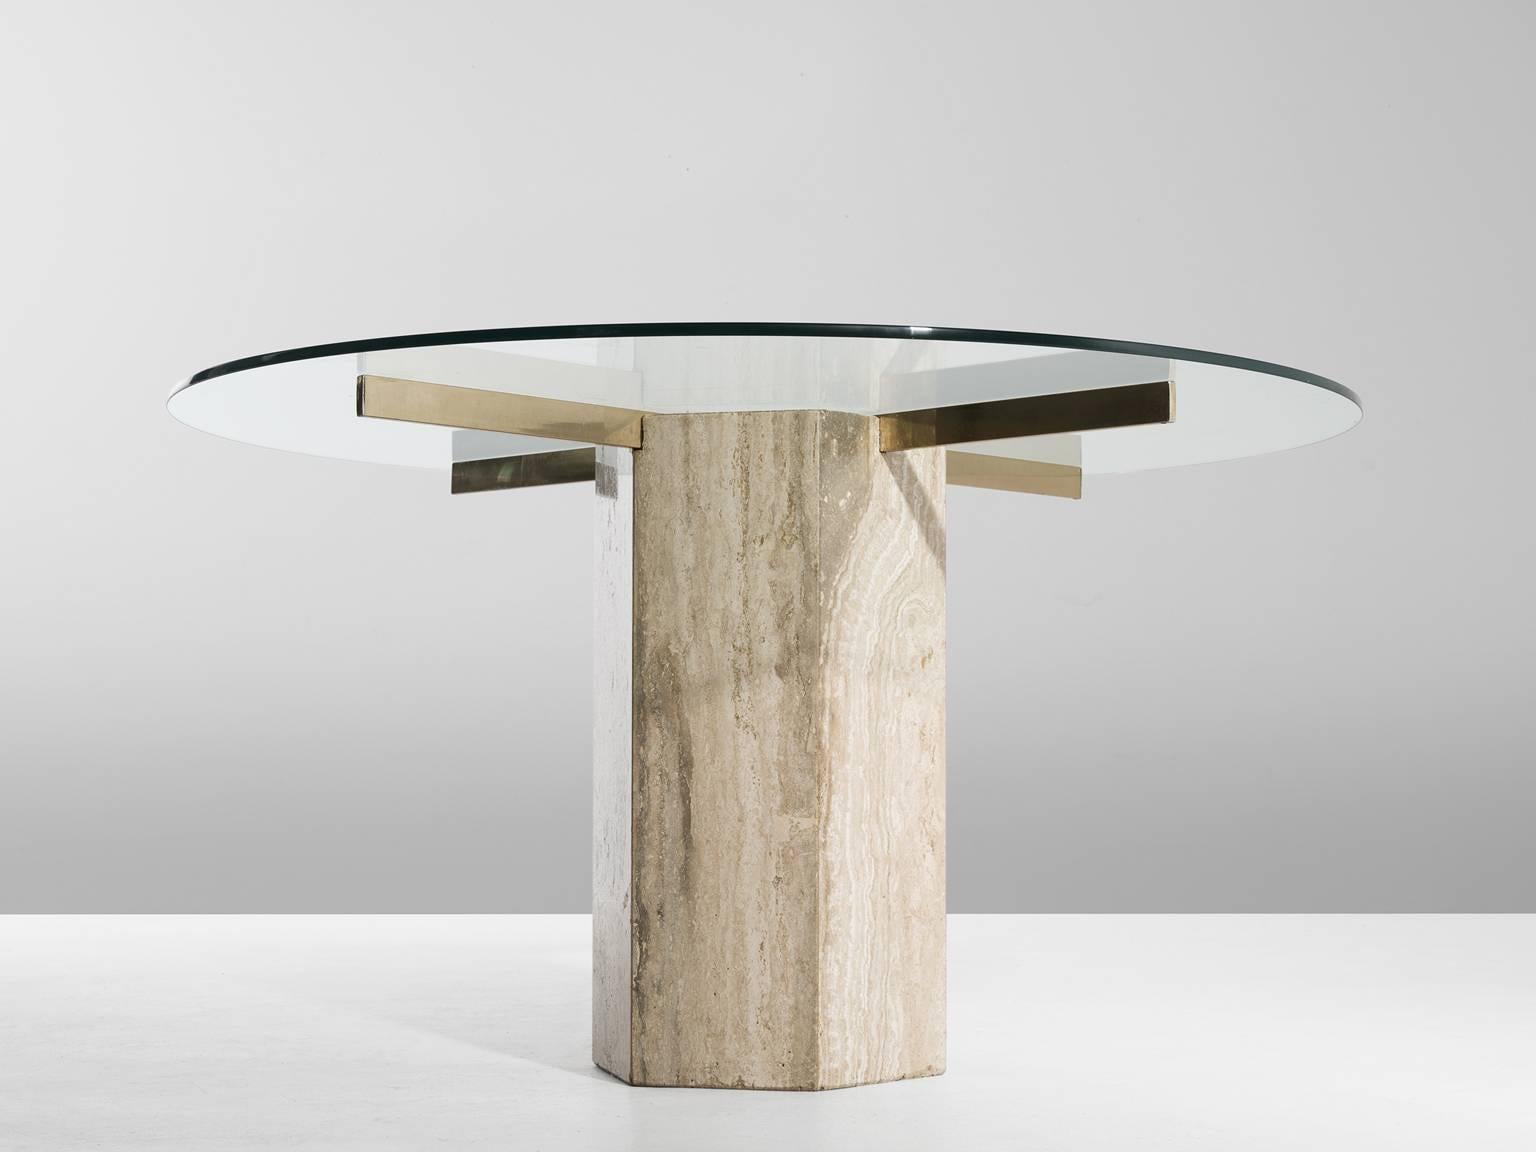 Hollywood Regency Italian Travertine and Brass Round Dining Table